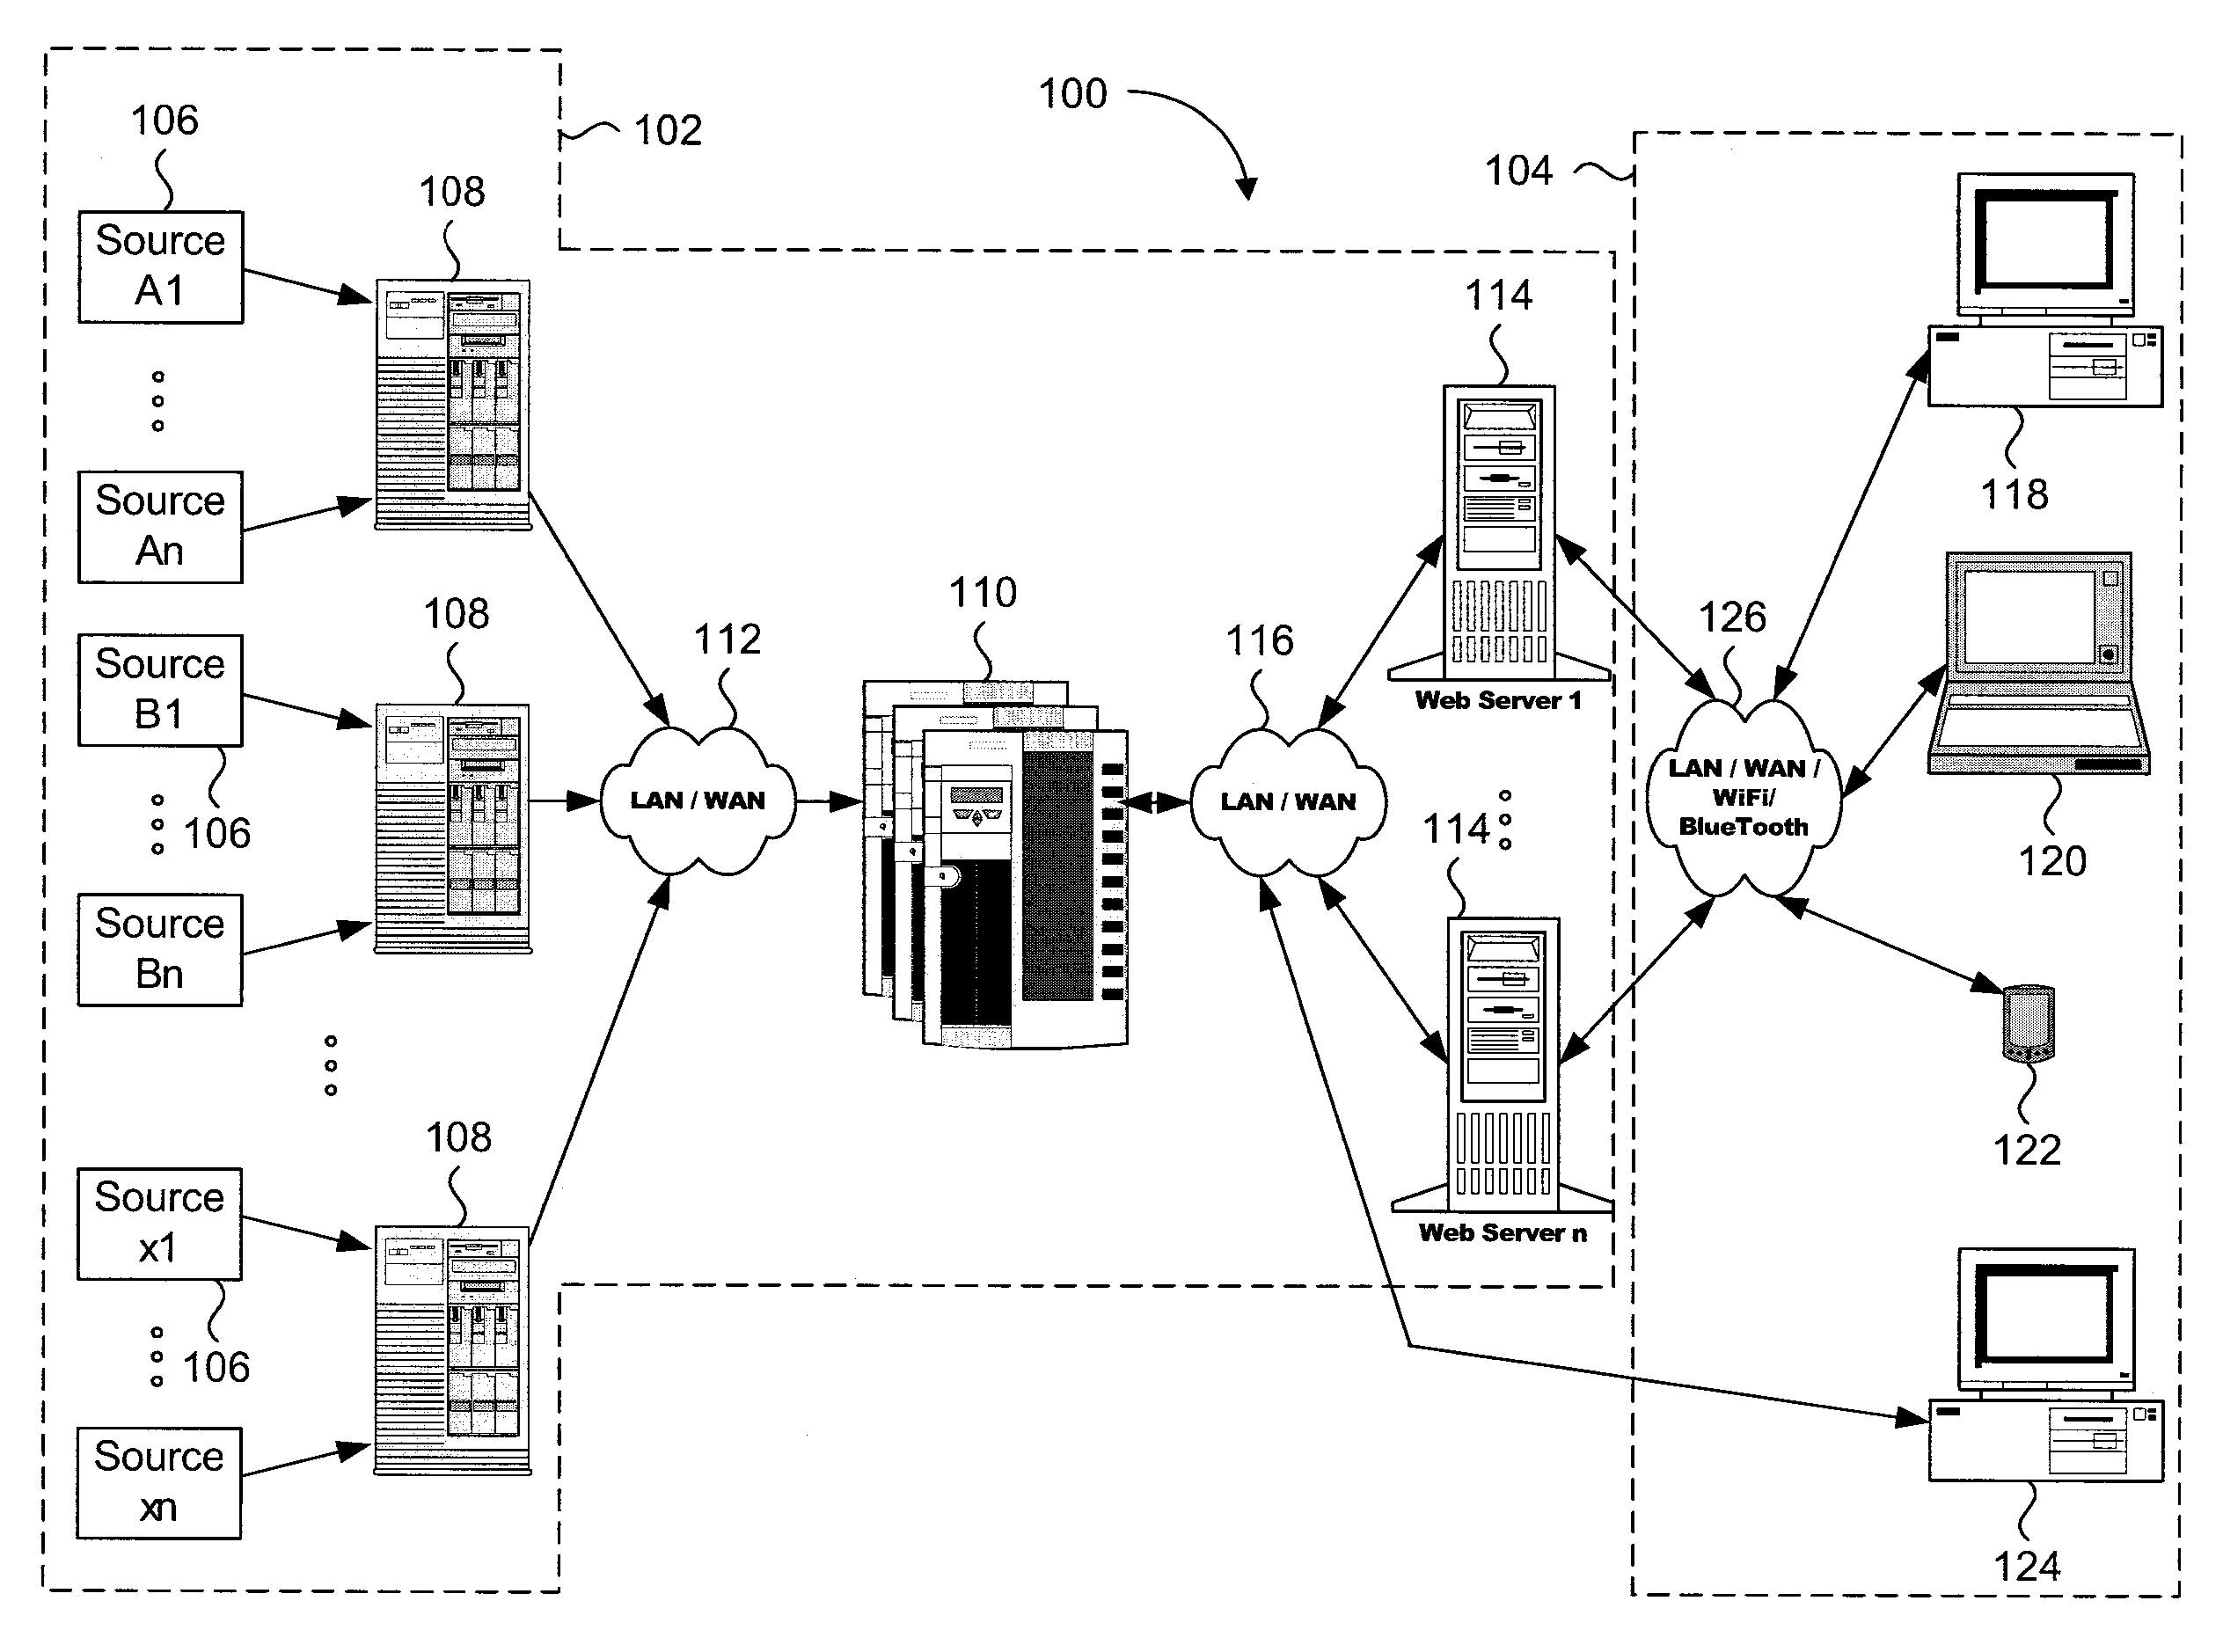 System and method for real-time media searching and alerting